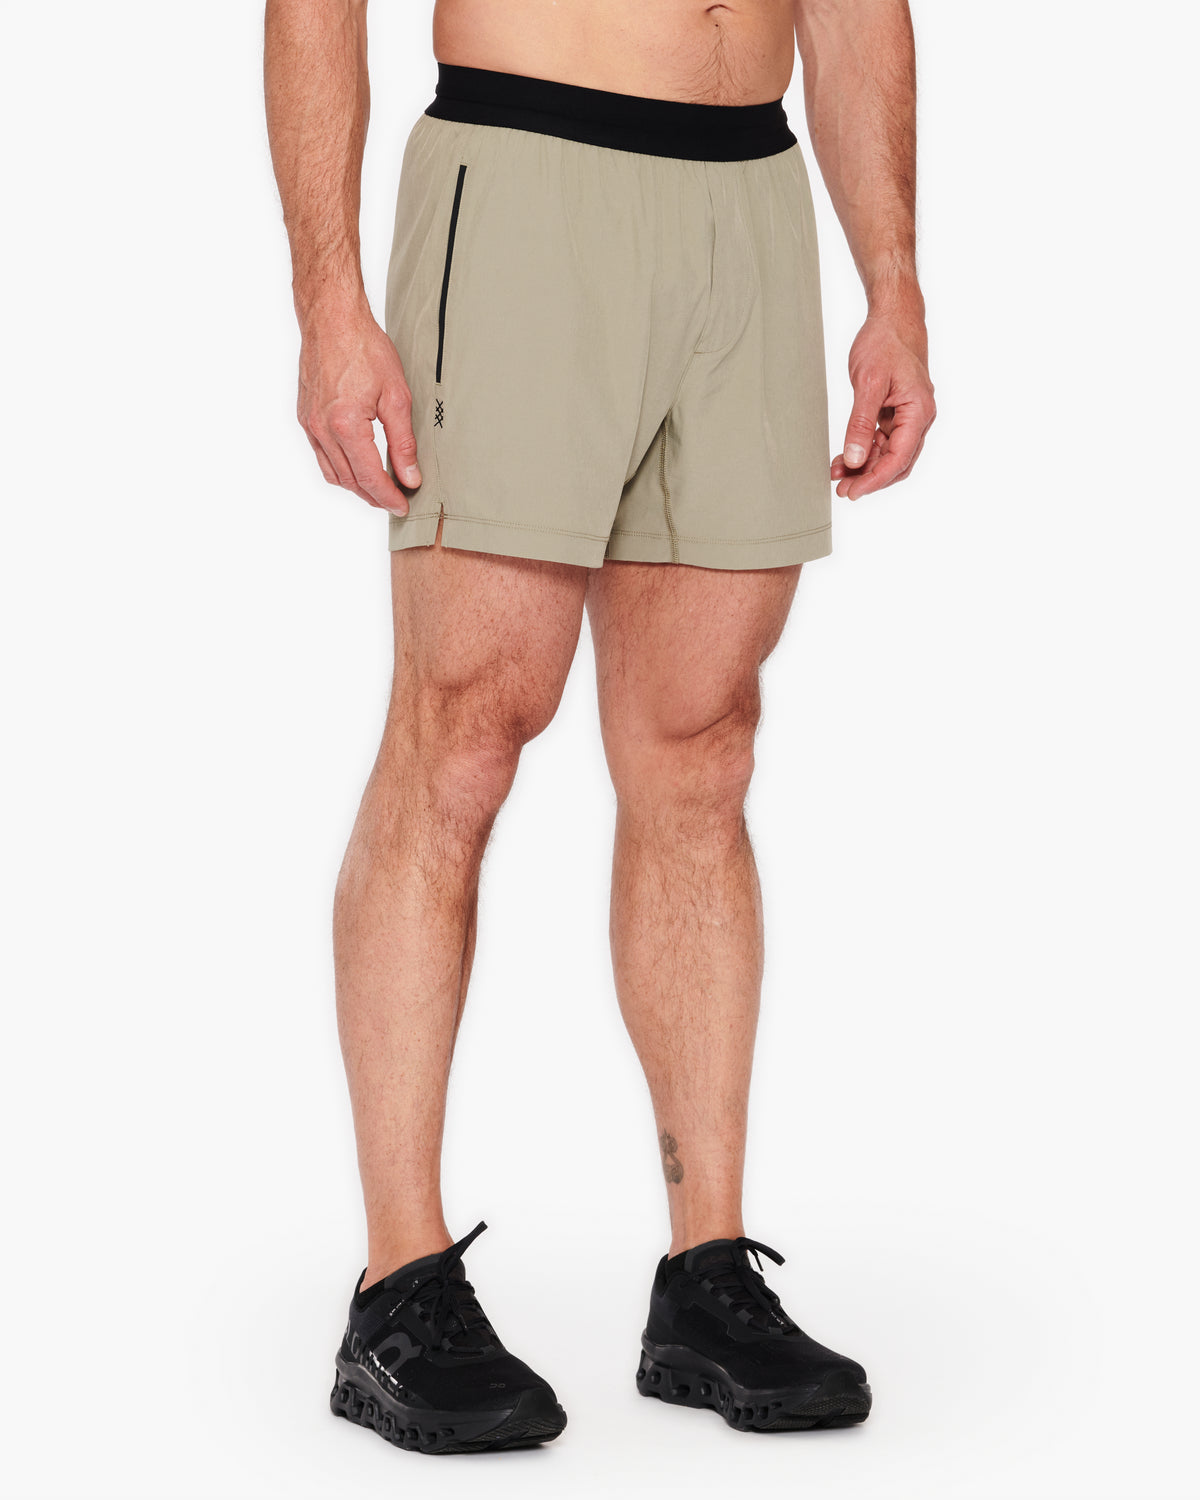 Ten Thousand Session Short 5 - Unlined – The Shop at Equinox